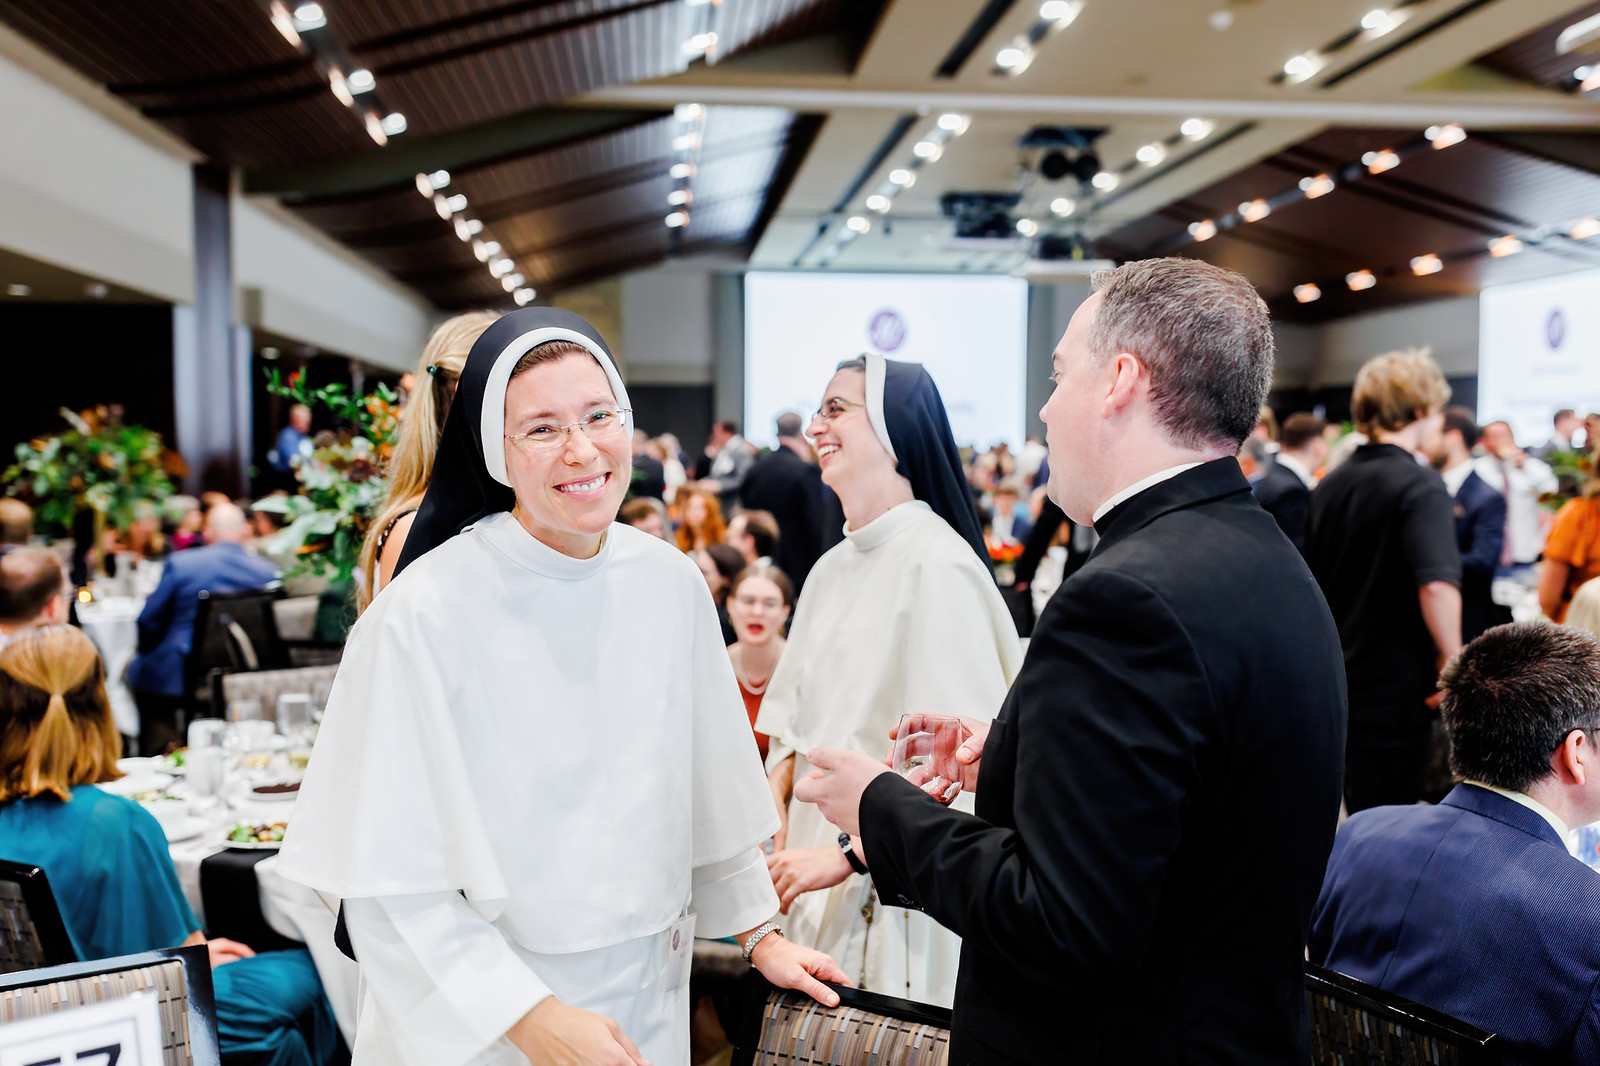 A nun smiling kindly surrounded by many people at a decorated banquet.